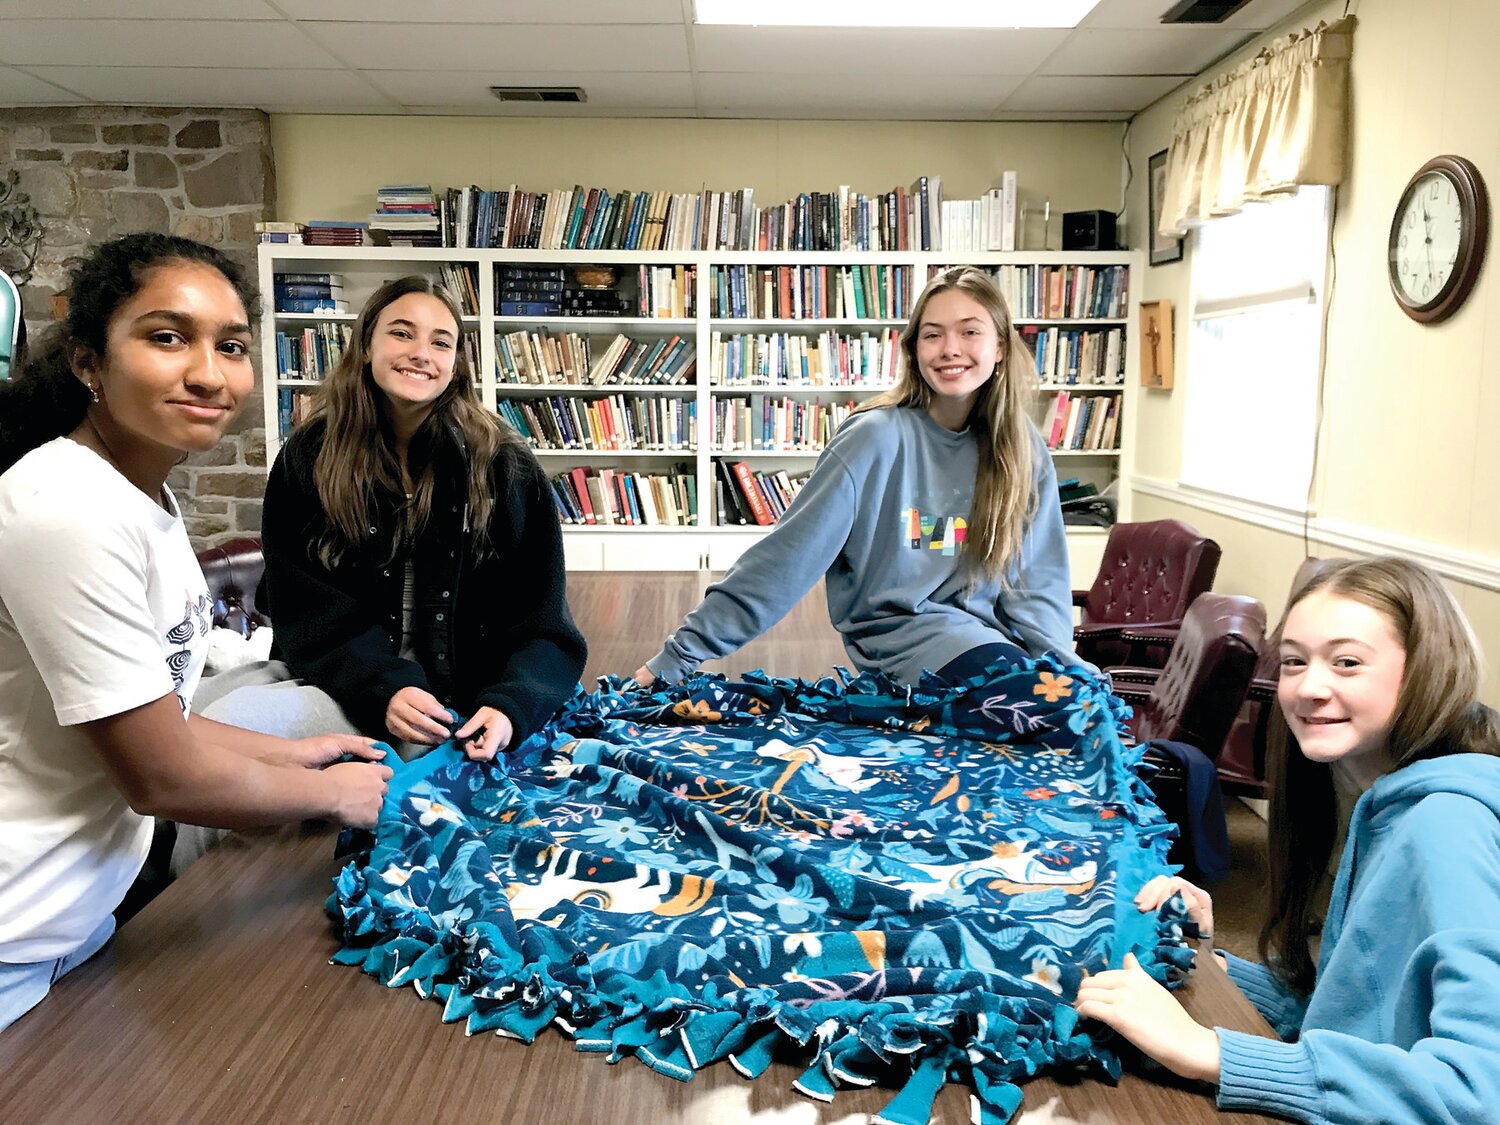 New Hope-Solebury School District students made no-sew blankets during last year’s MLK Day of Service at Thompson Memorial Presbyterian Church in New Hope.